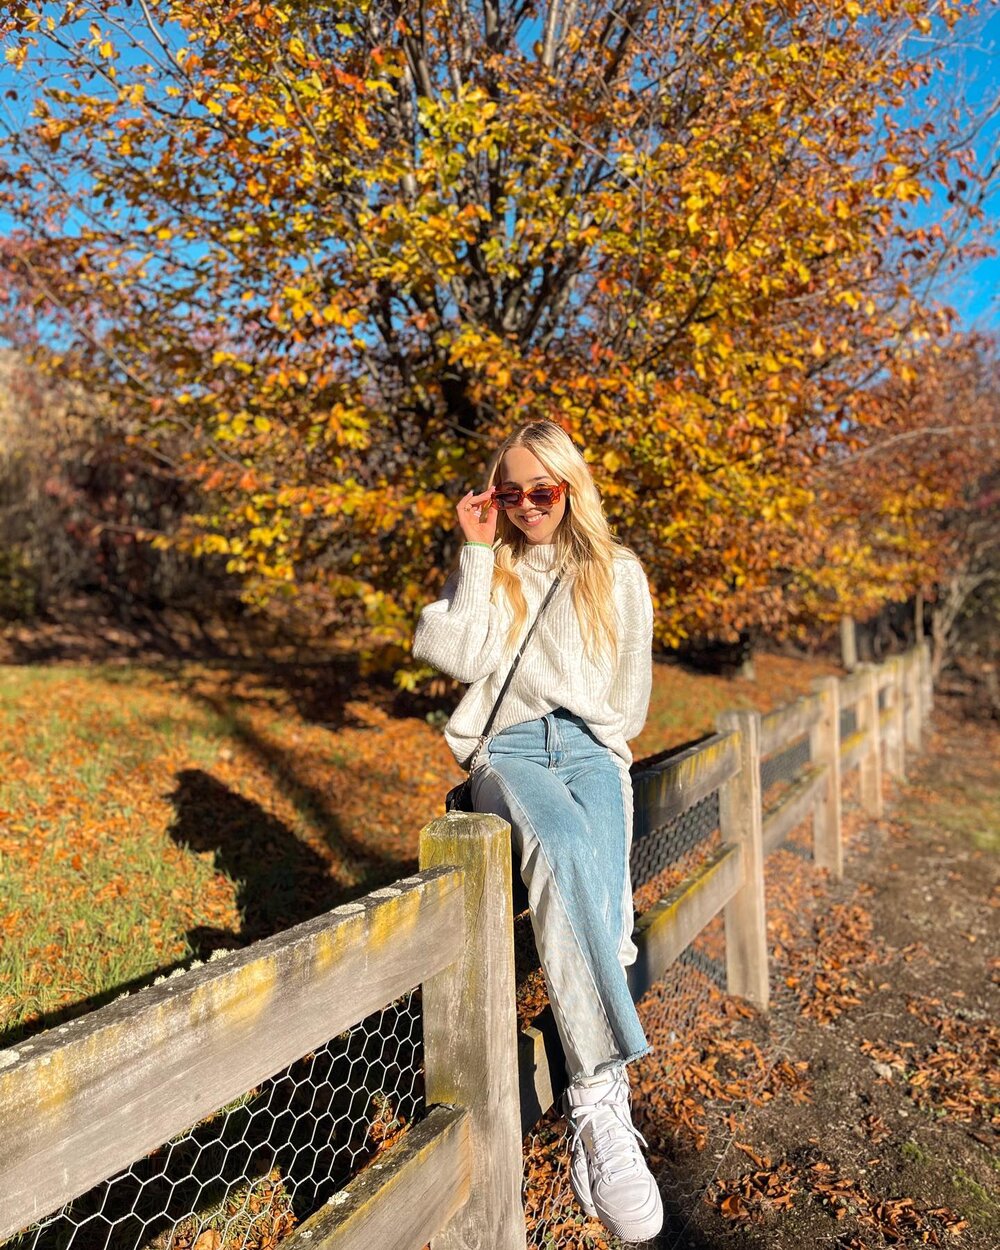 Last week I headed back to Queenstown to soak up the last of the beautiful autumn colours!! It was one of the most relaxing few days filled with amazing chats, cocktails, wine, spas and food!!

What type of travel do you like? Sometimes when it&rsquo